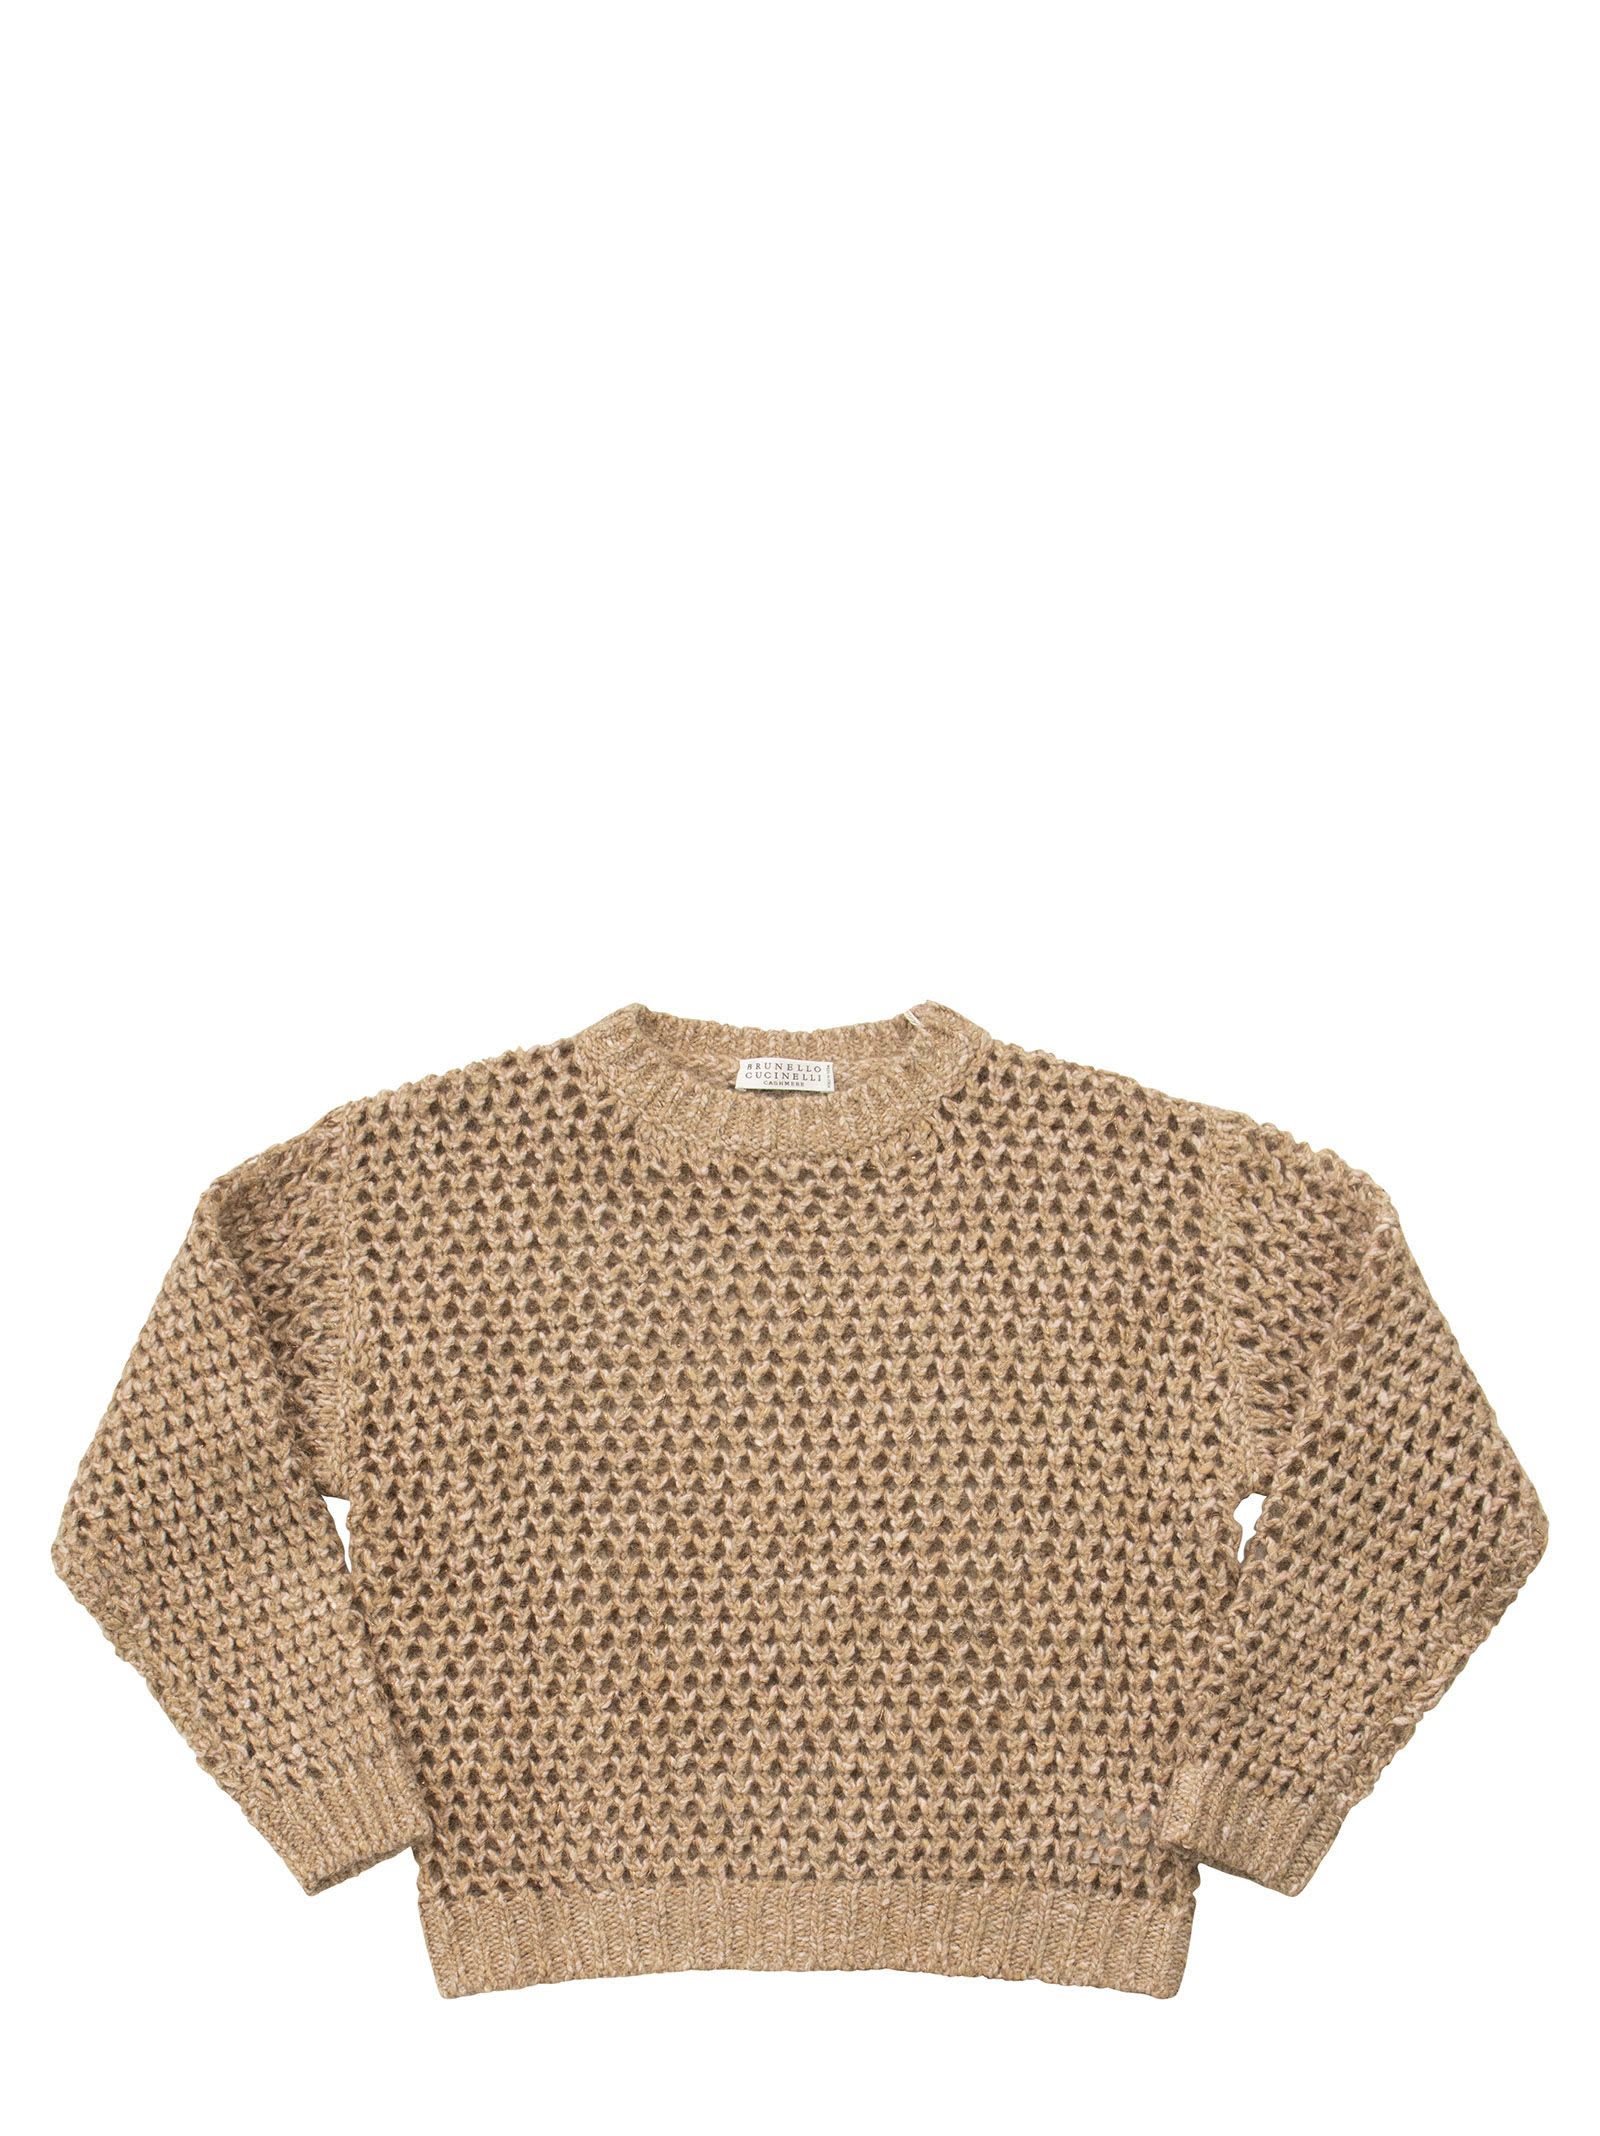 Brunello Cucinelli Wool And Cashmere Sweater With Lurex